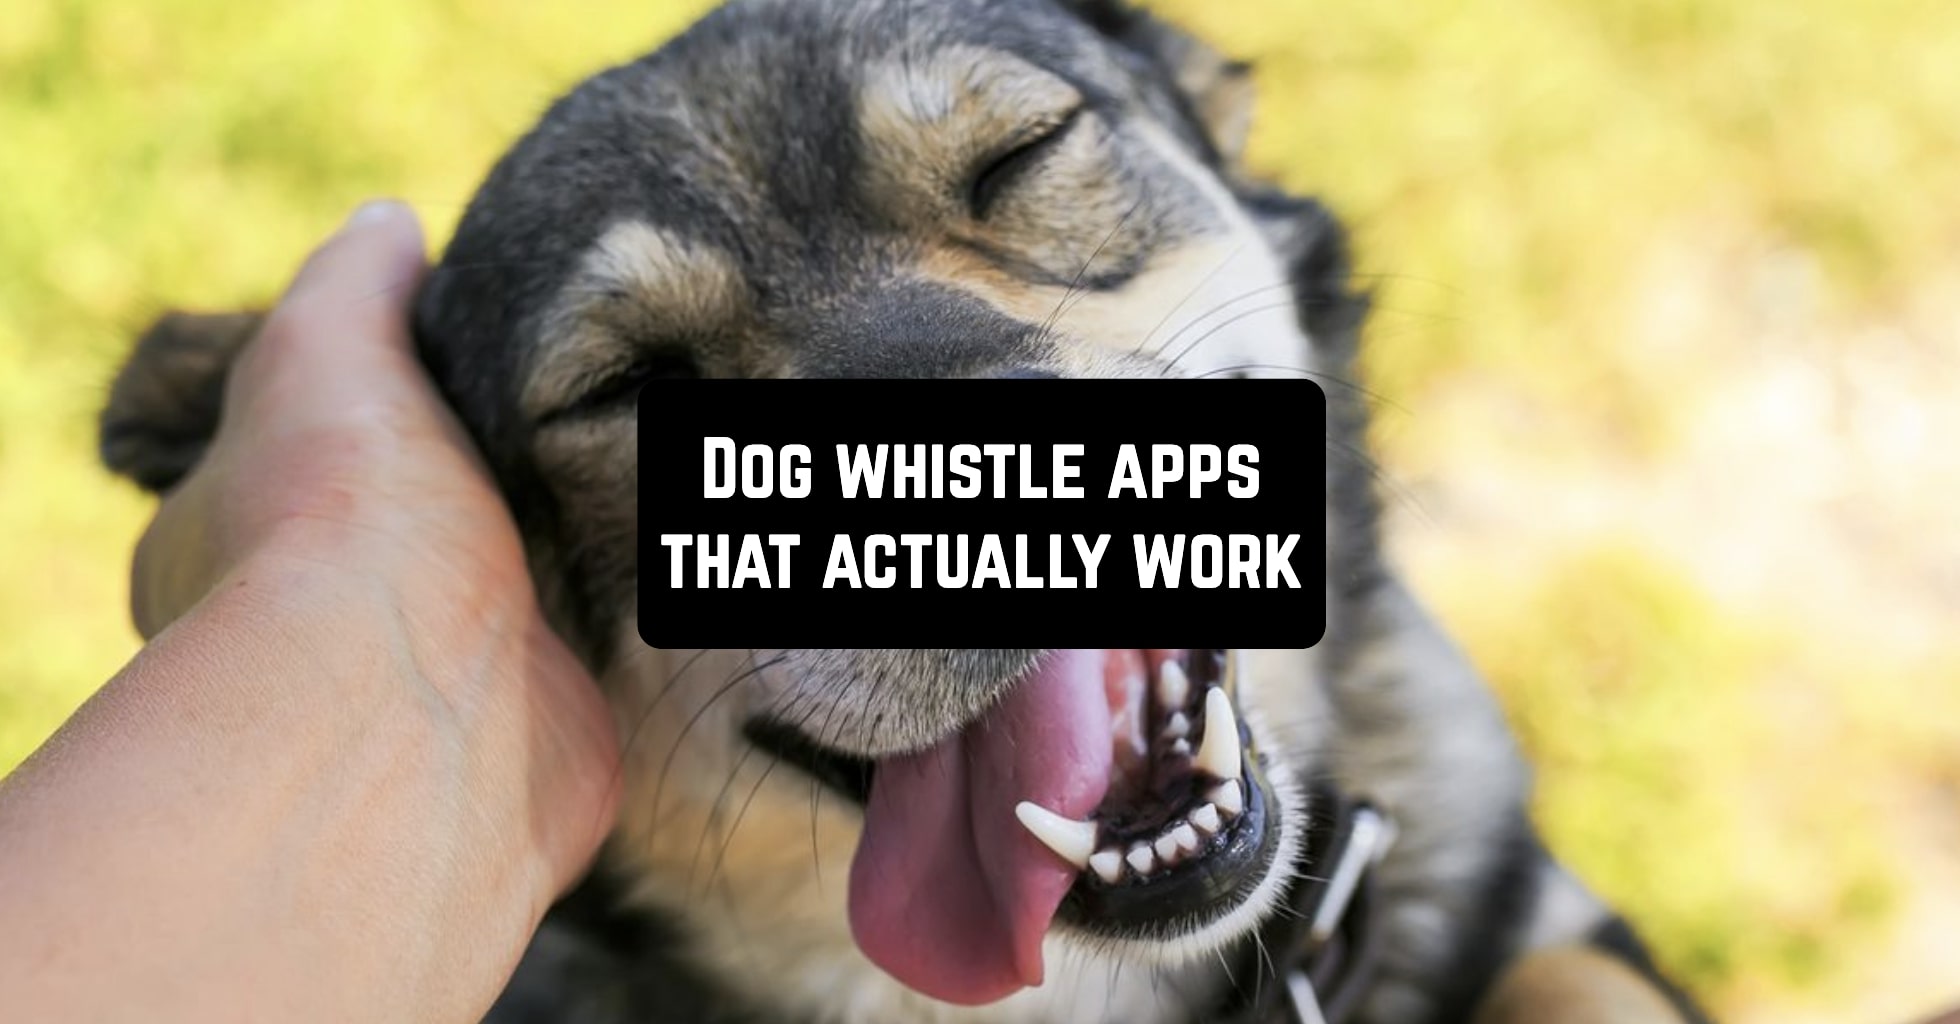 11 Dog whistle apps that actually work